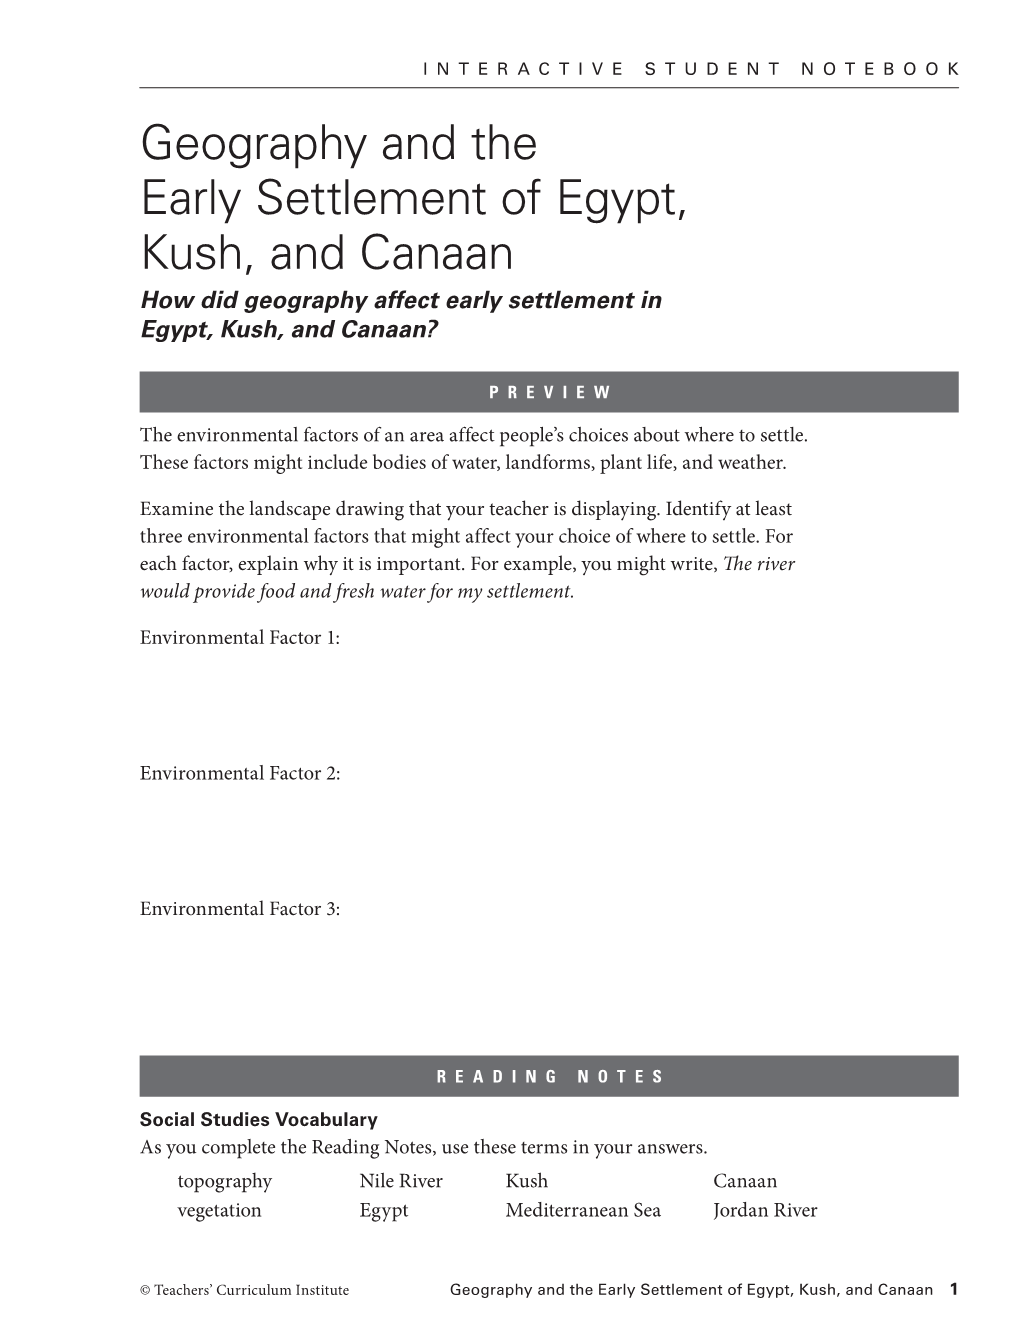 Geography and the Early Settlement of Egypt, Kush, and Canaan How Did Geography Affect Early Settlement in Egypt, Kush, and Canaan?